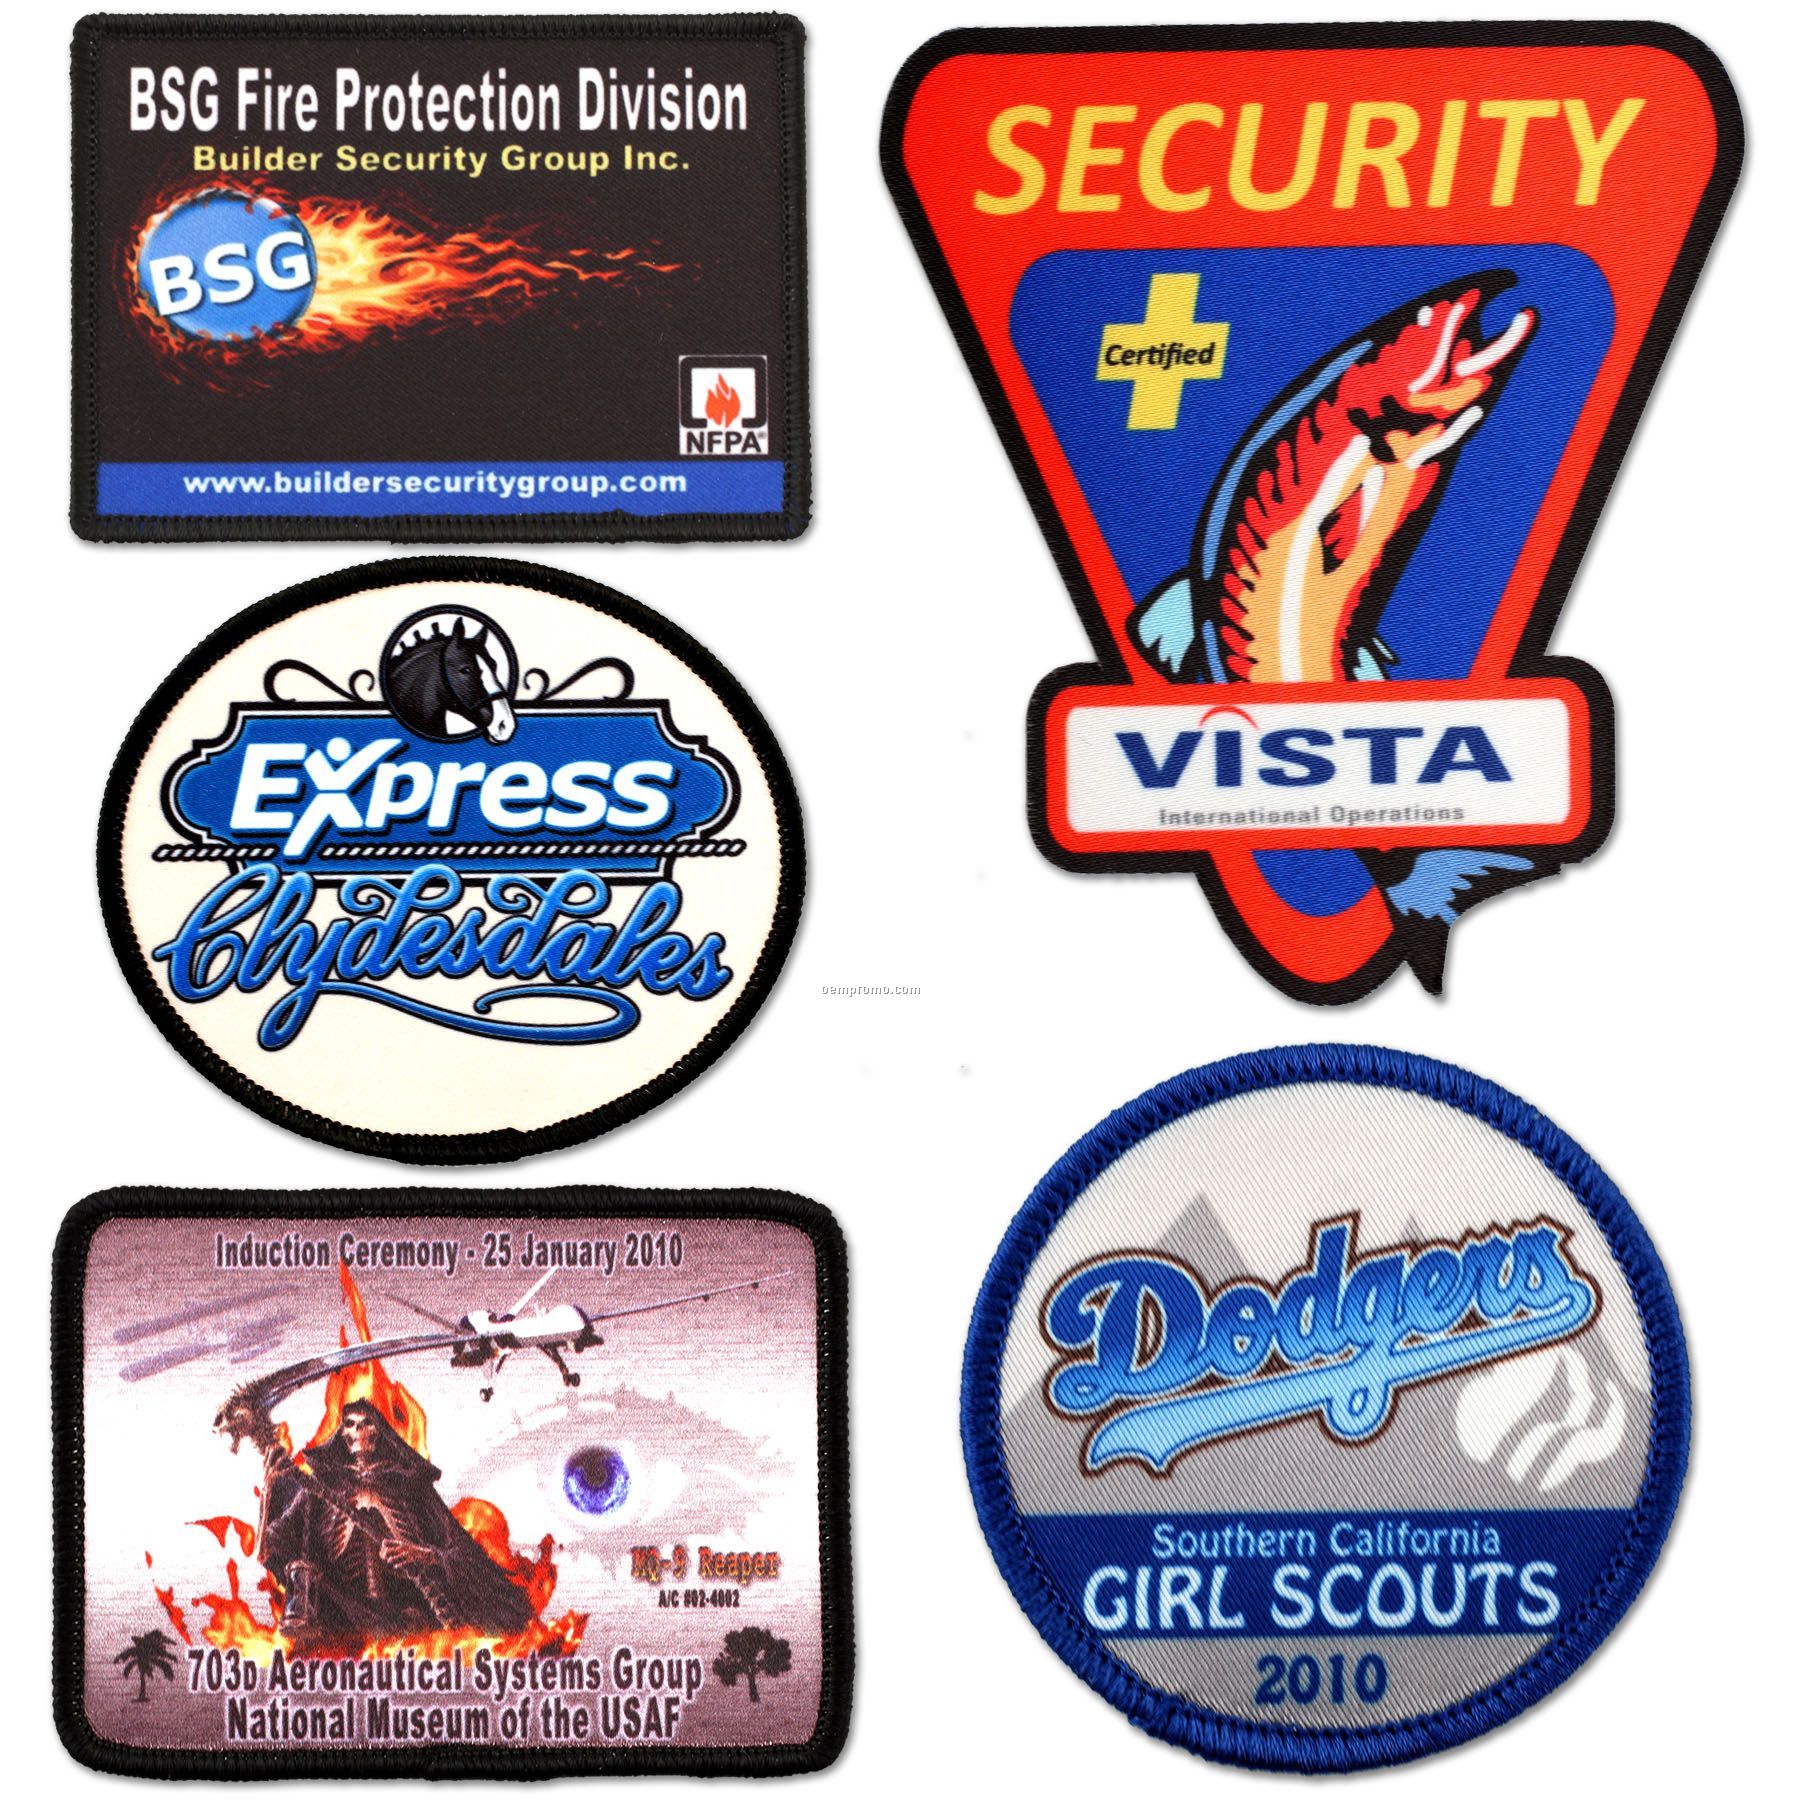 4-color Process / Sublimated Patch - 8 Sq. In.